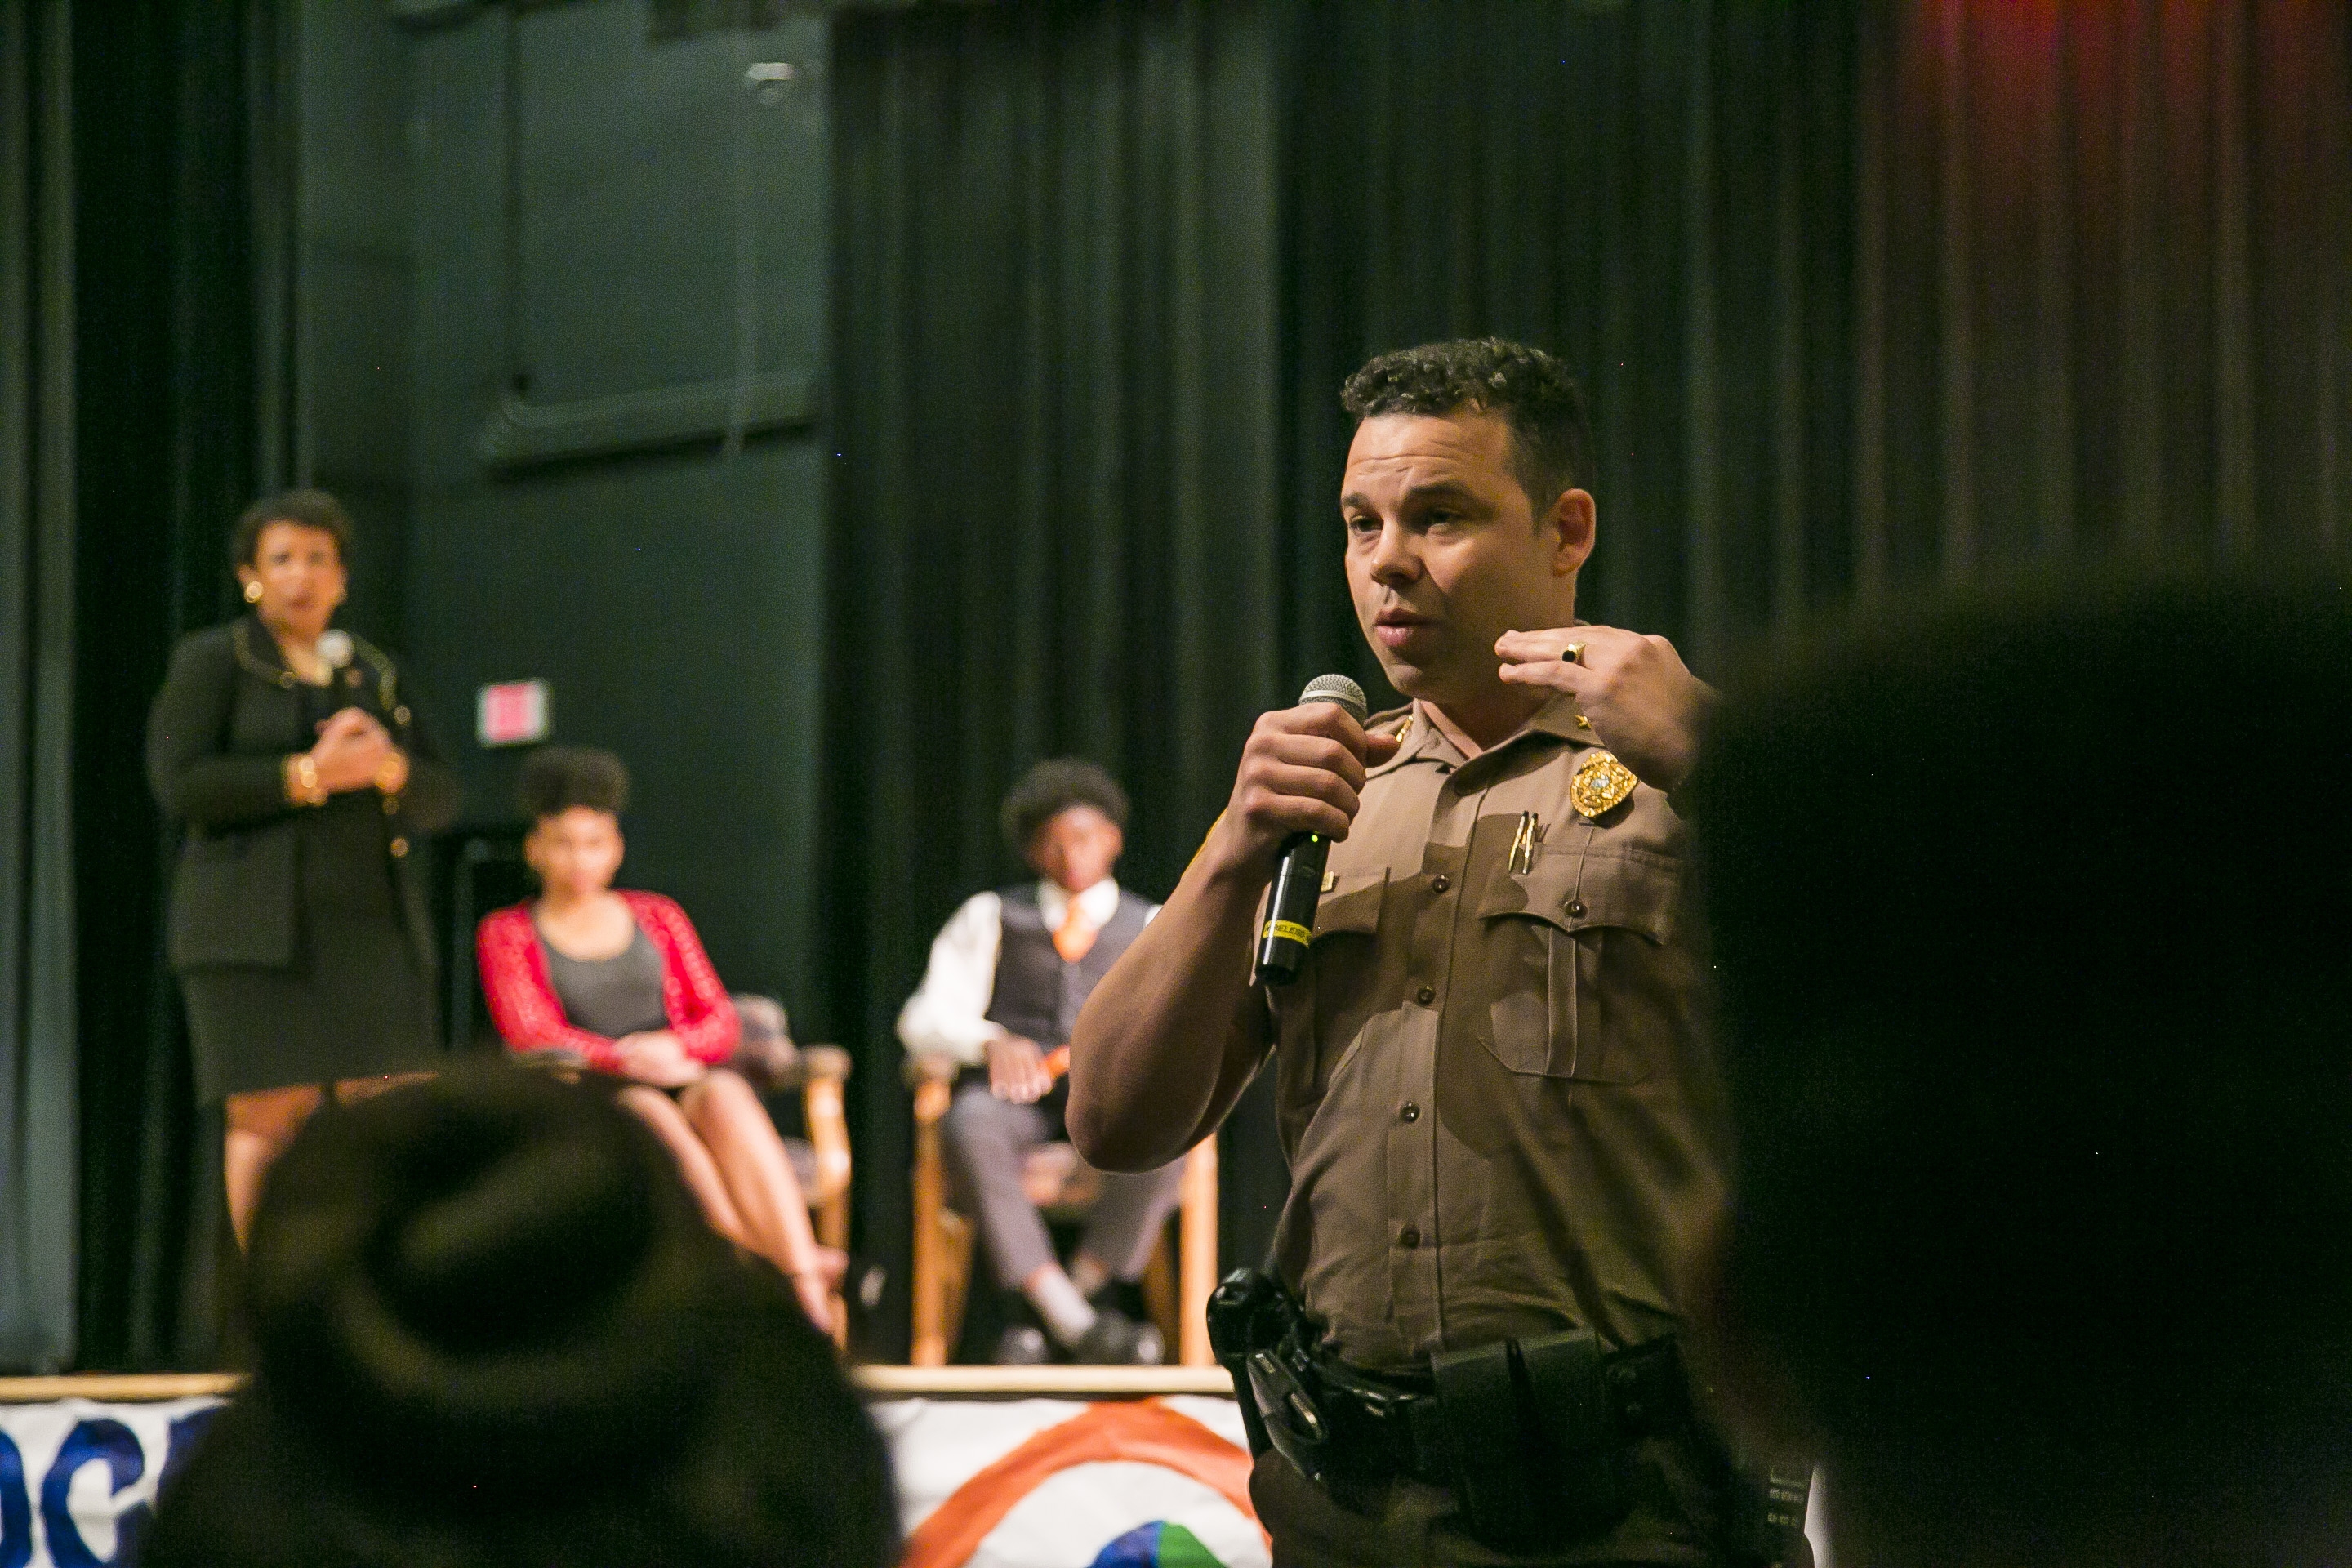 Attorney General Lynch, Student Peace Ambassadors, and officers discuss police-community relations at a youth down hall at Miami